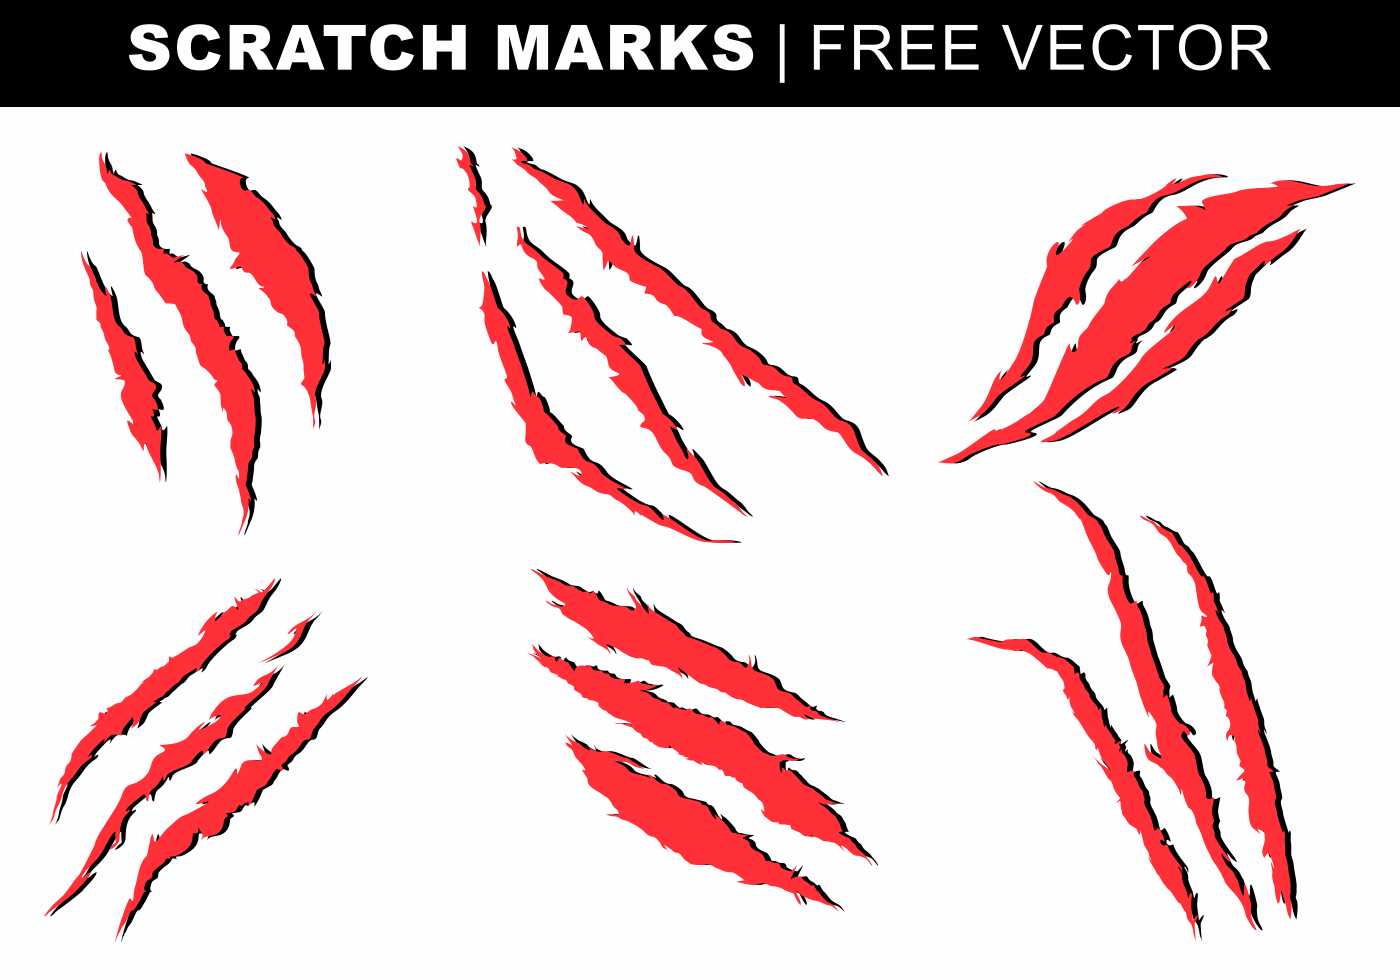 Scratch Marks Free Vector.